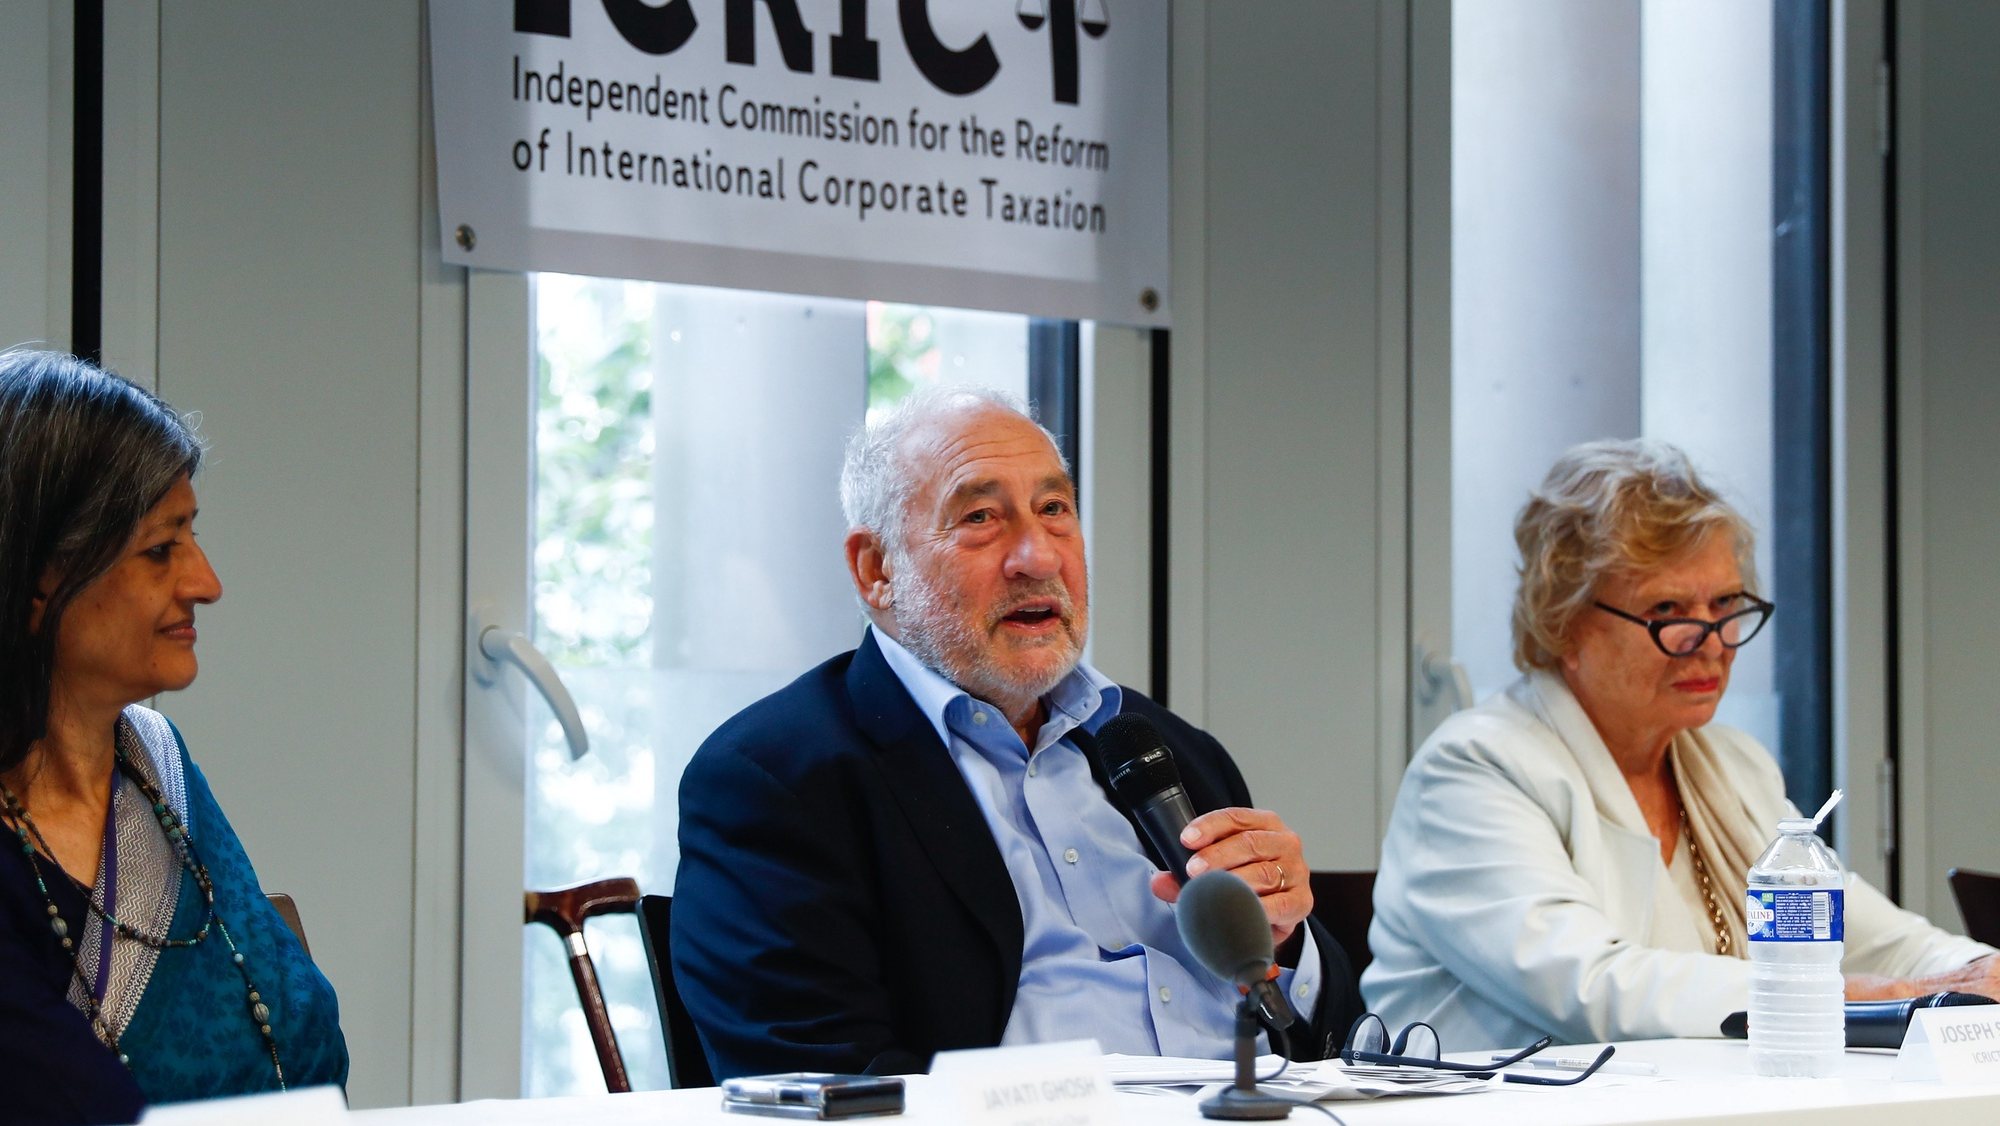 epa10187662 American economist and Independent Commission for the Reform of International Corporate Taxation (ICRICT) co-chair Joseph Stiglitz (C) speaks during a press conference at the Paris School of Economics in Paris, France, 16 September 2022. Members of the ICRICT commission presented the new ICRICT report and detailed concrete proposals in terms of taxation of superprofits and alternatives to the global tax agreement.  EPA/MOHAMMED BADRA